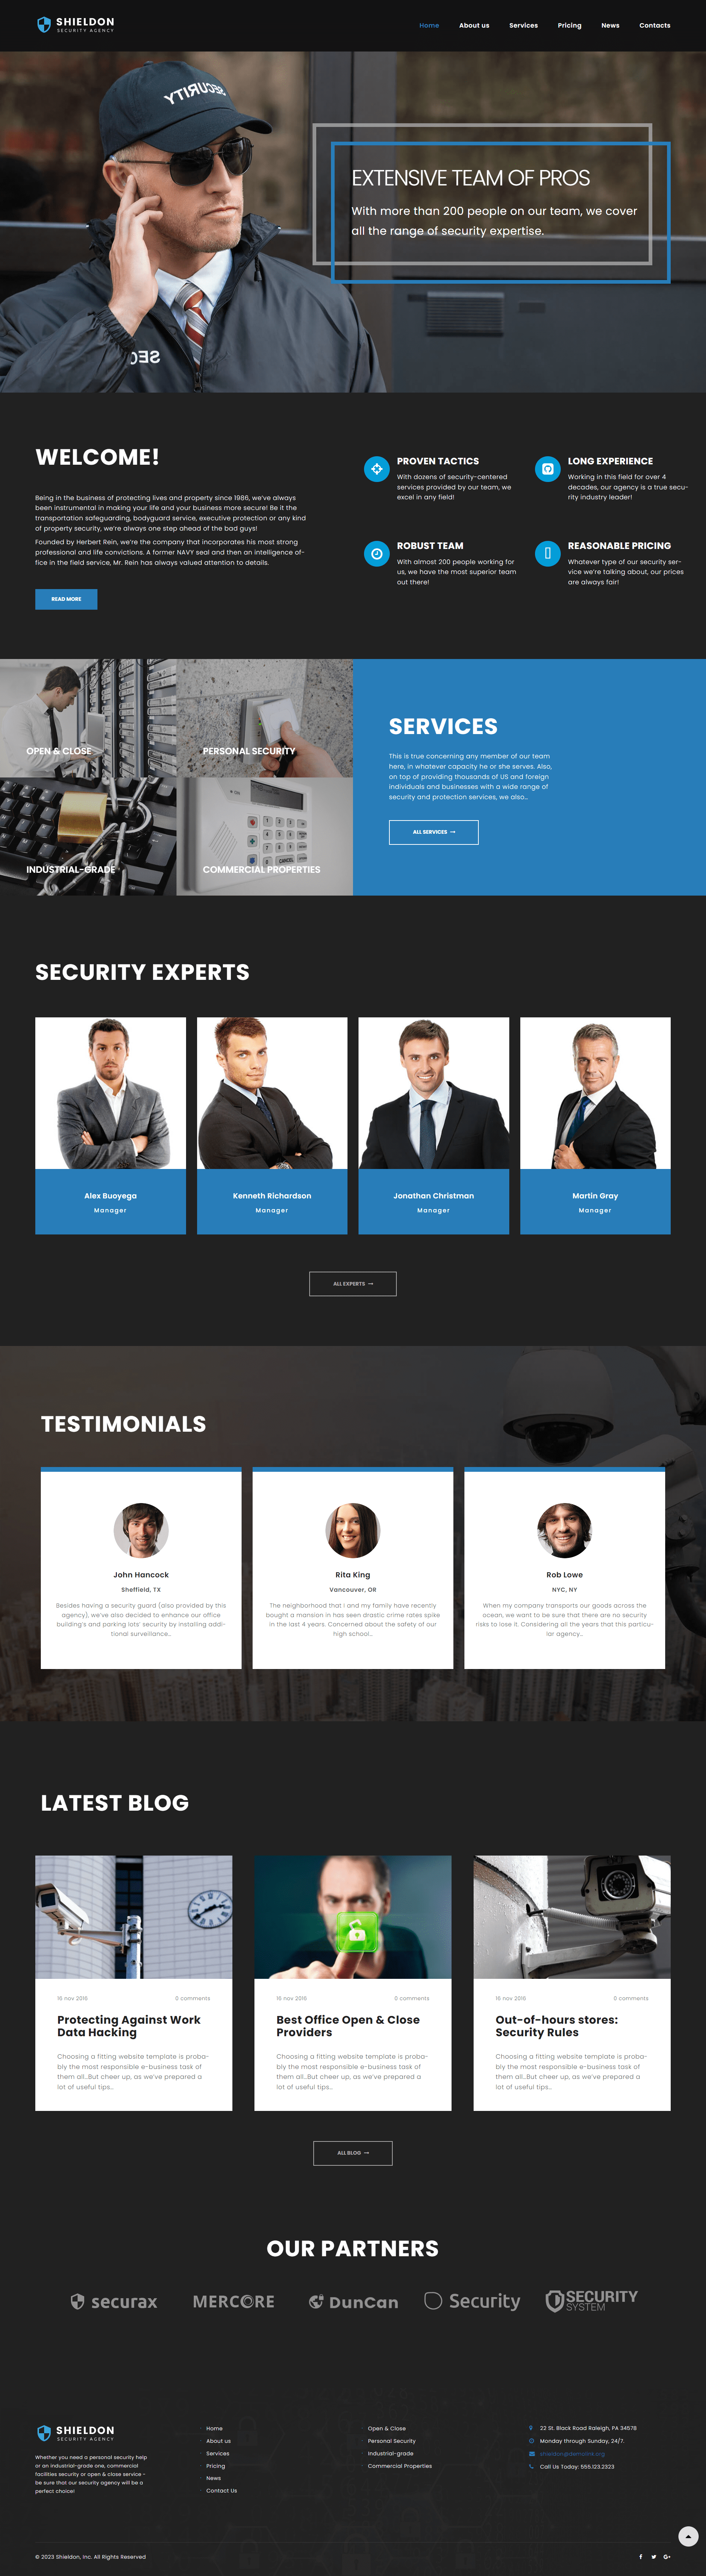 Security-services-website-template-2